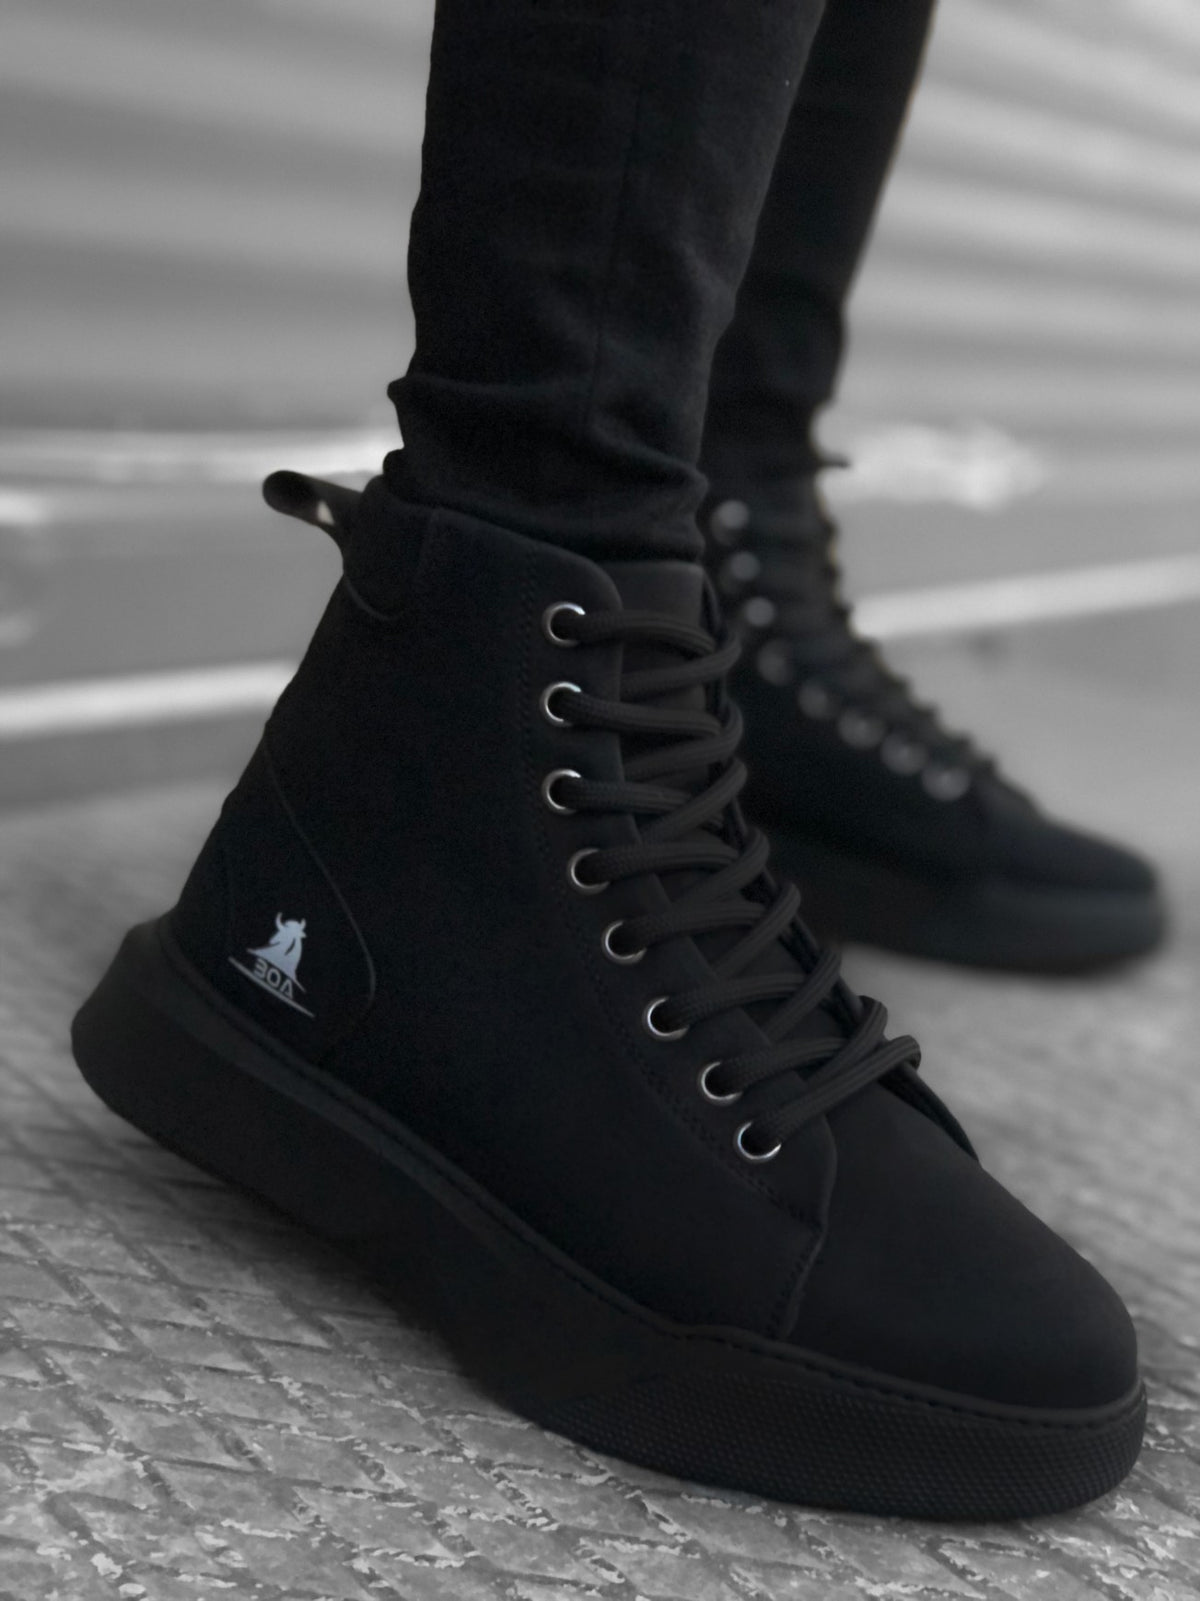 BA0155 Lace-Up Men's High Sole Black Sport Boot - STREETMODE ™